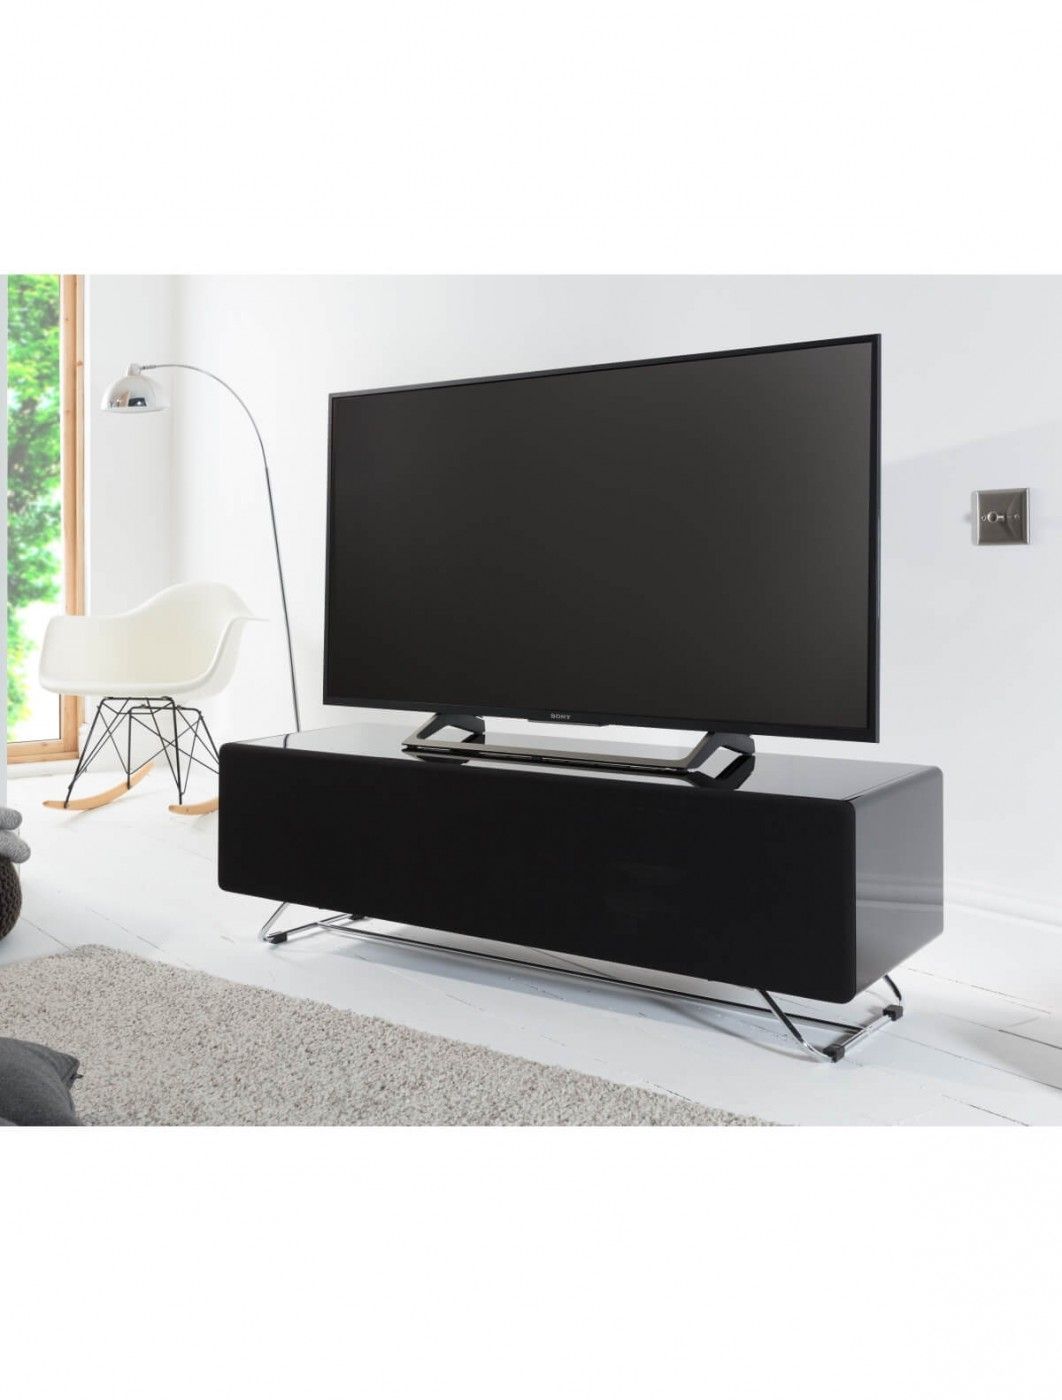 Tv Stand Black Chromium Concept 1200mm Cro2 1200cpt Bk Within Chromium Tv Stands (View 14 of 15)